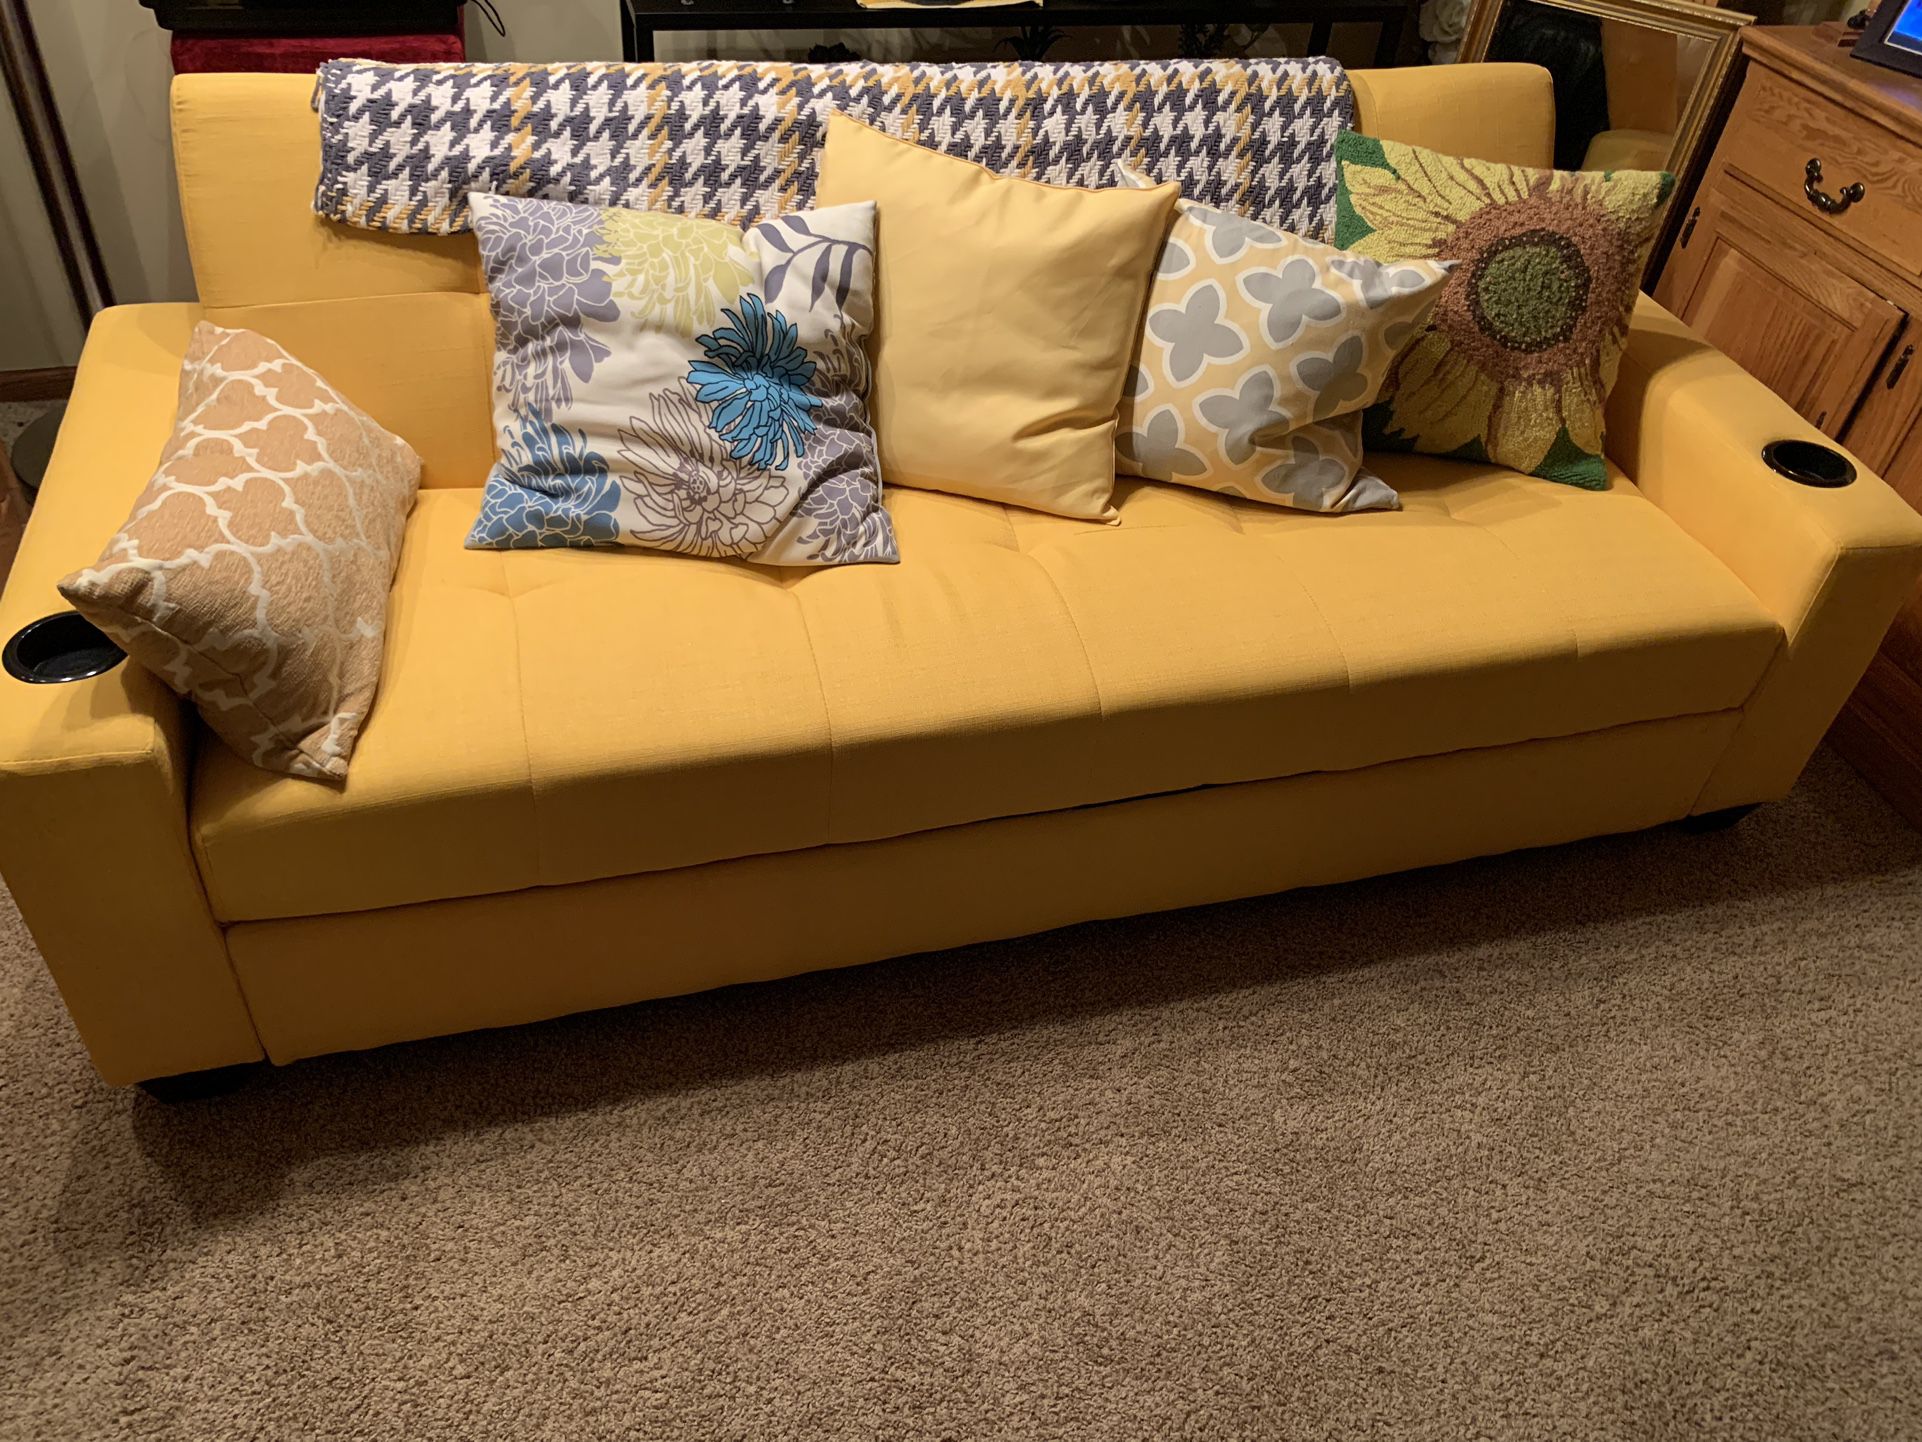 Sofa & Bed ! Great PRICE- 💛TUNS Of Storage Pillows & Throws💛Unique Versatile Comfy Couch! Sofa-bed! 💛 Two Storage Areas!